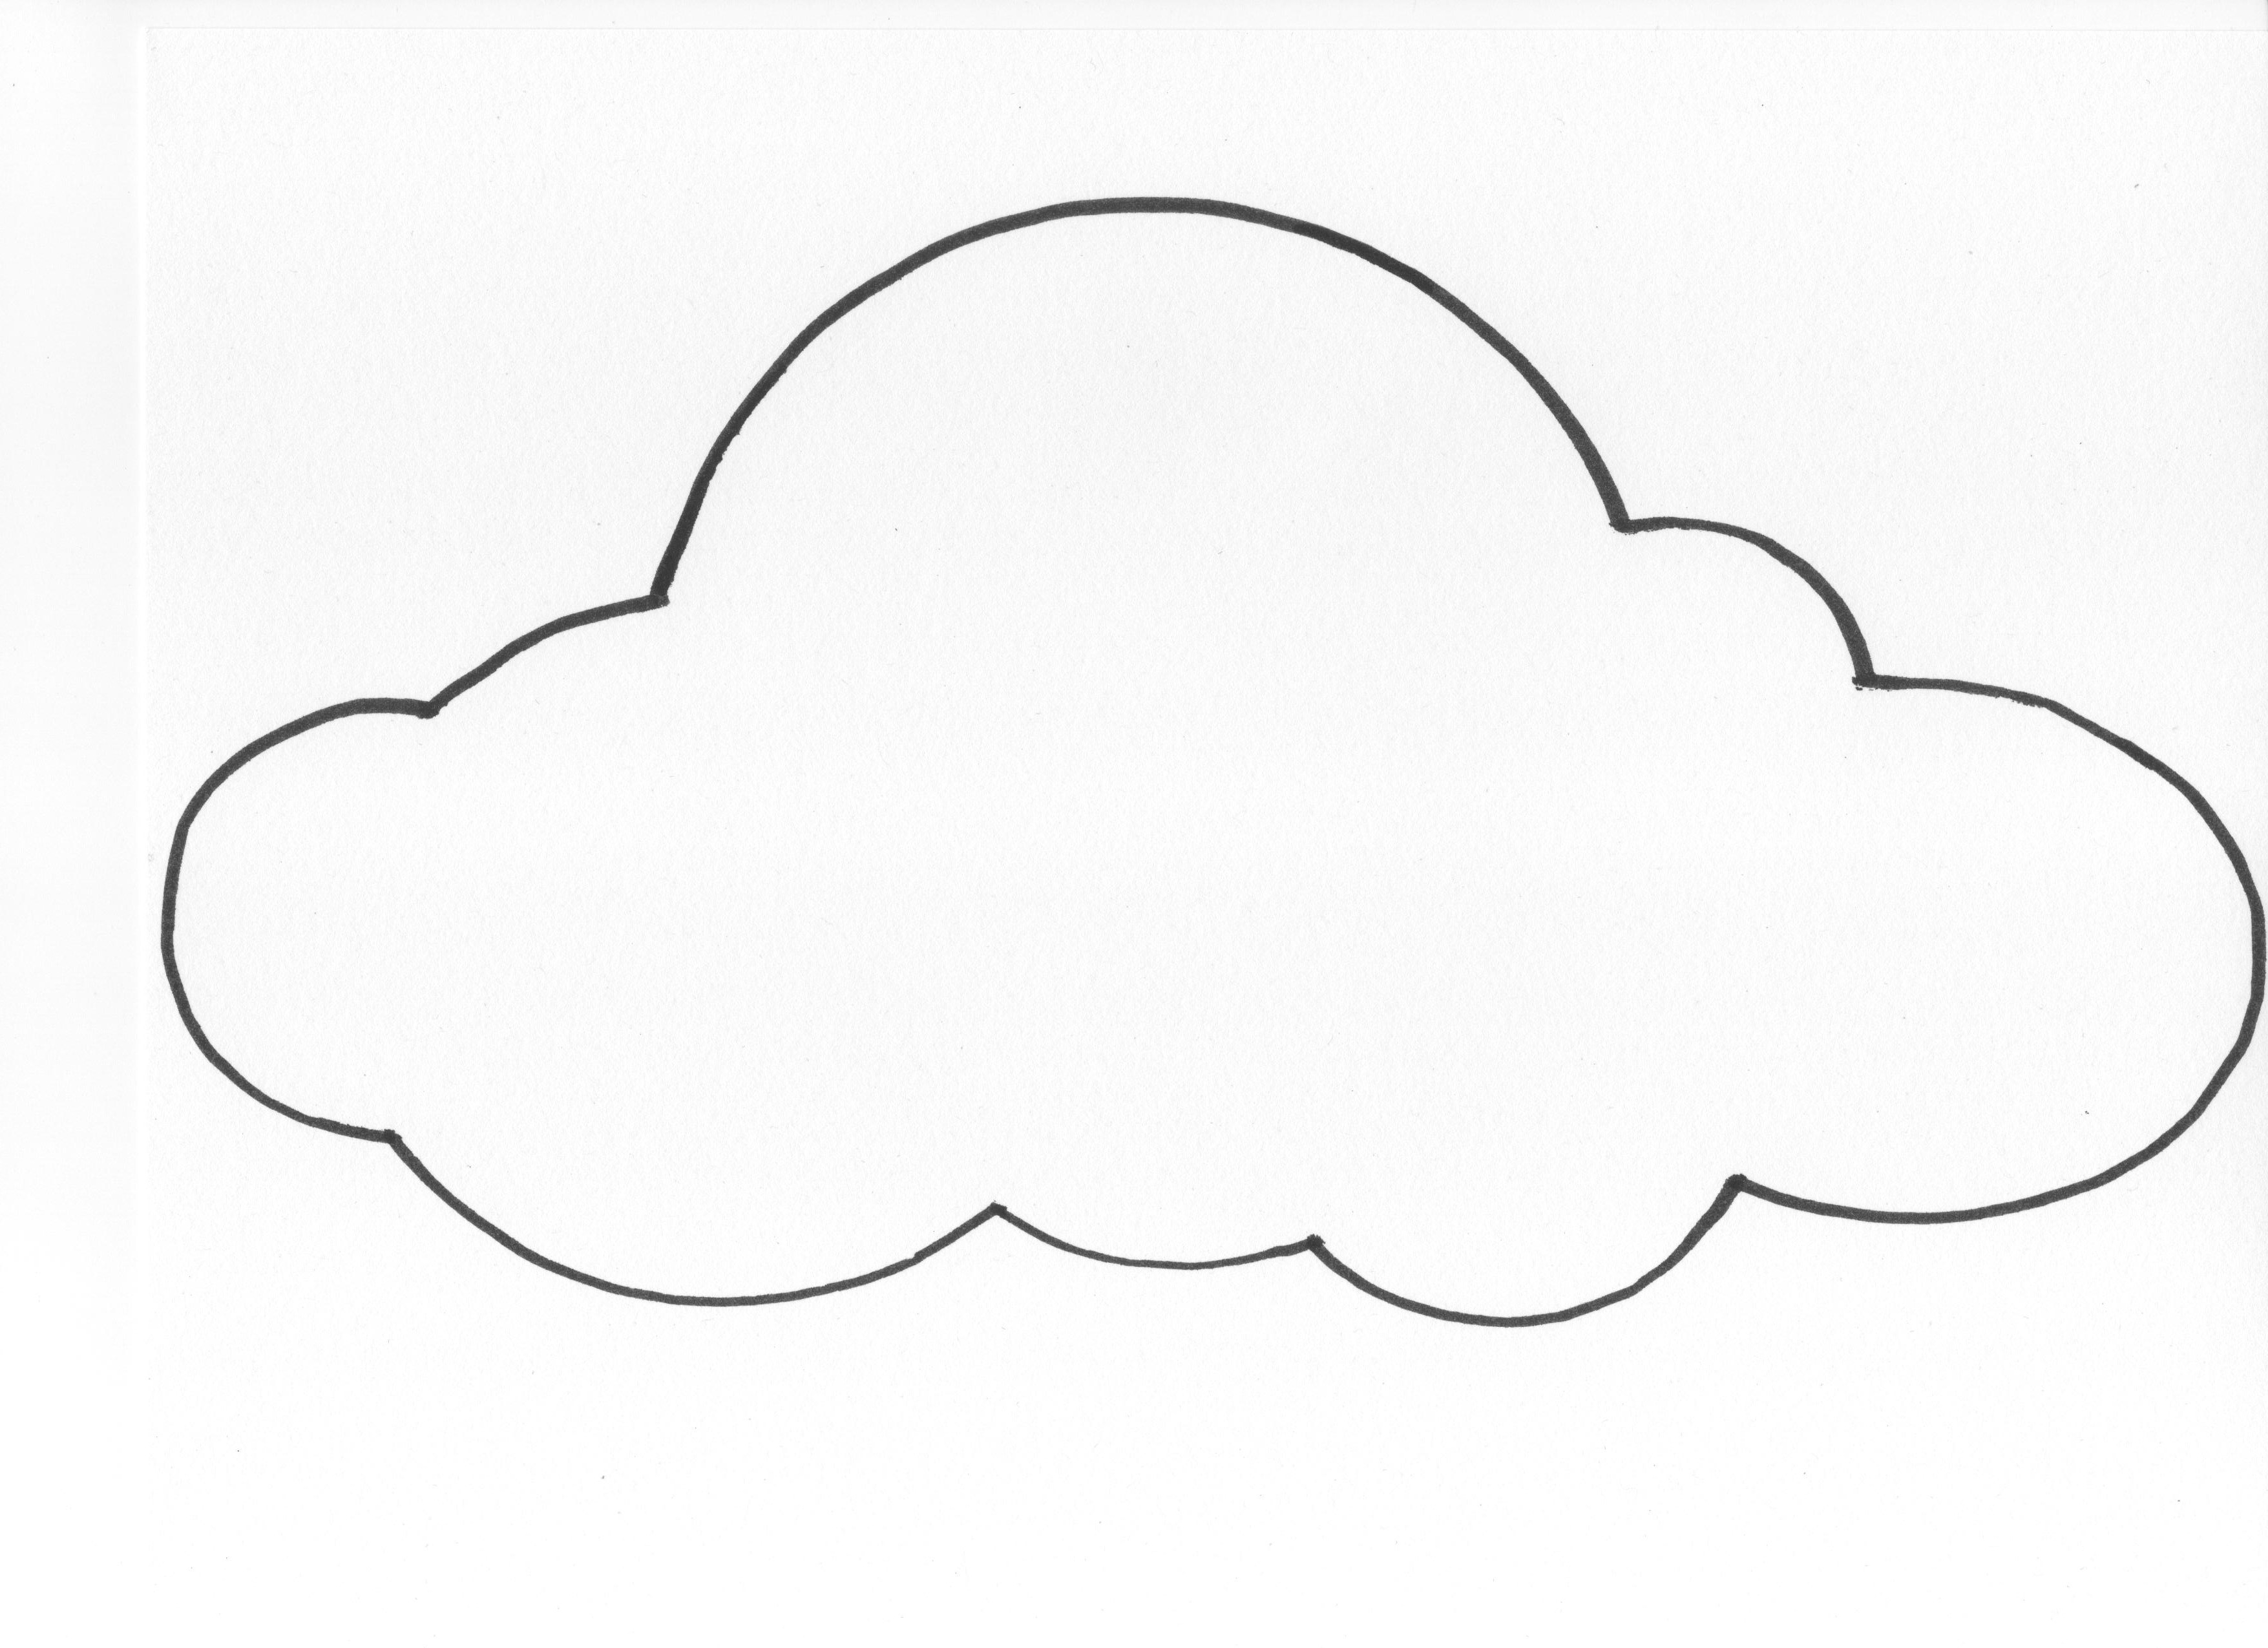 7 Best Images of Large Printable Cloud Template - Cloud Cut Out ...